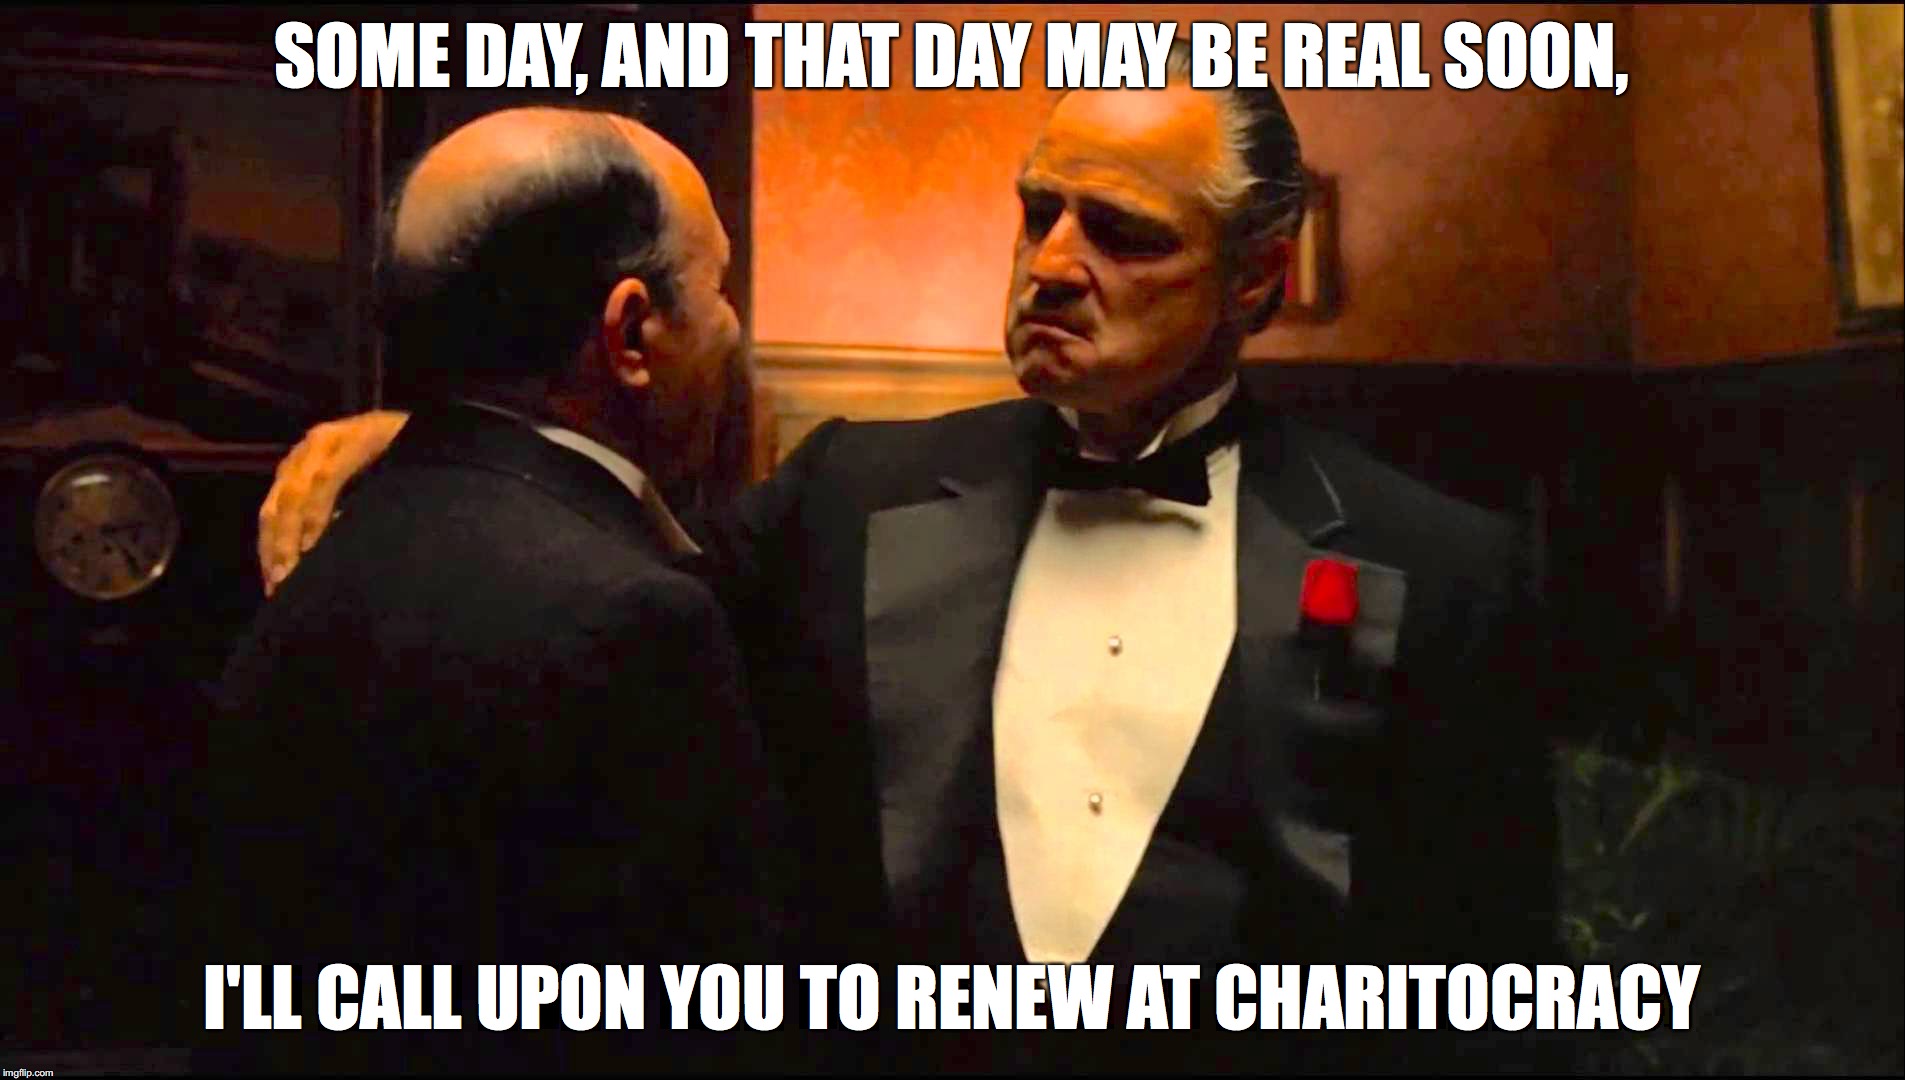 Some day, and that day may be real soon, I'll call upon you to renew at Charitocracy.